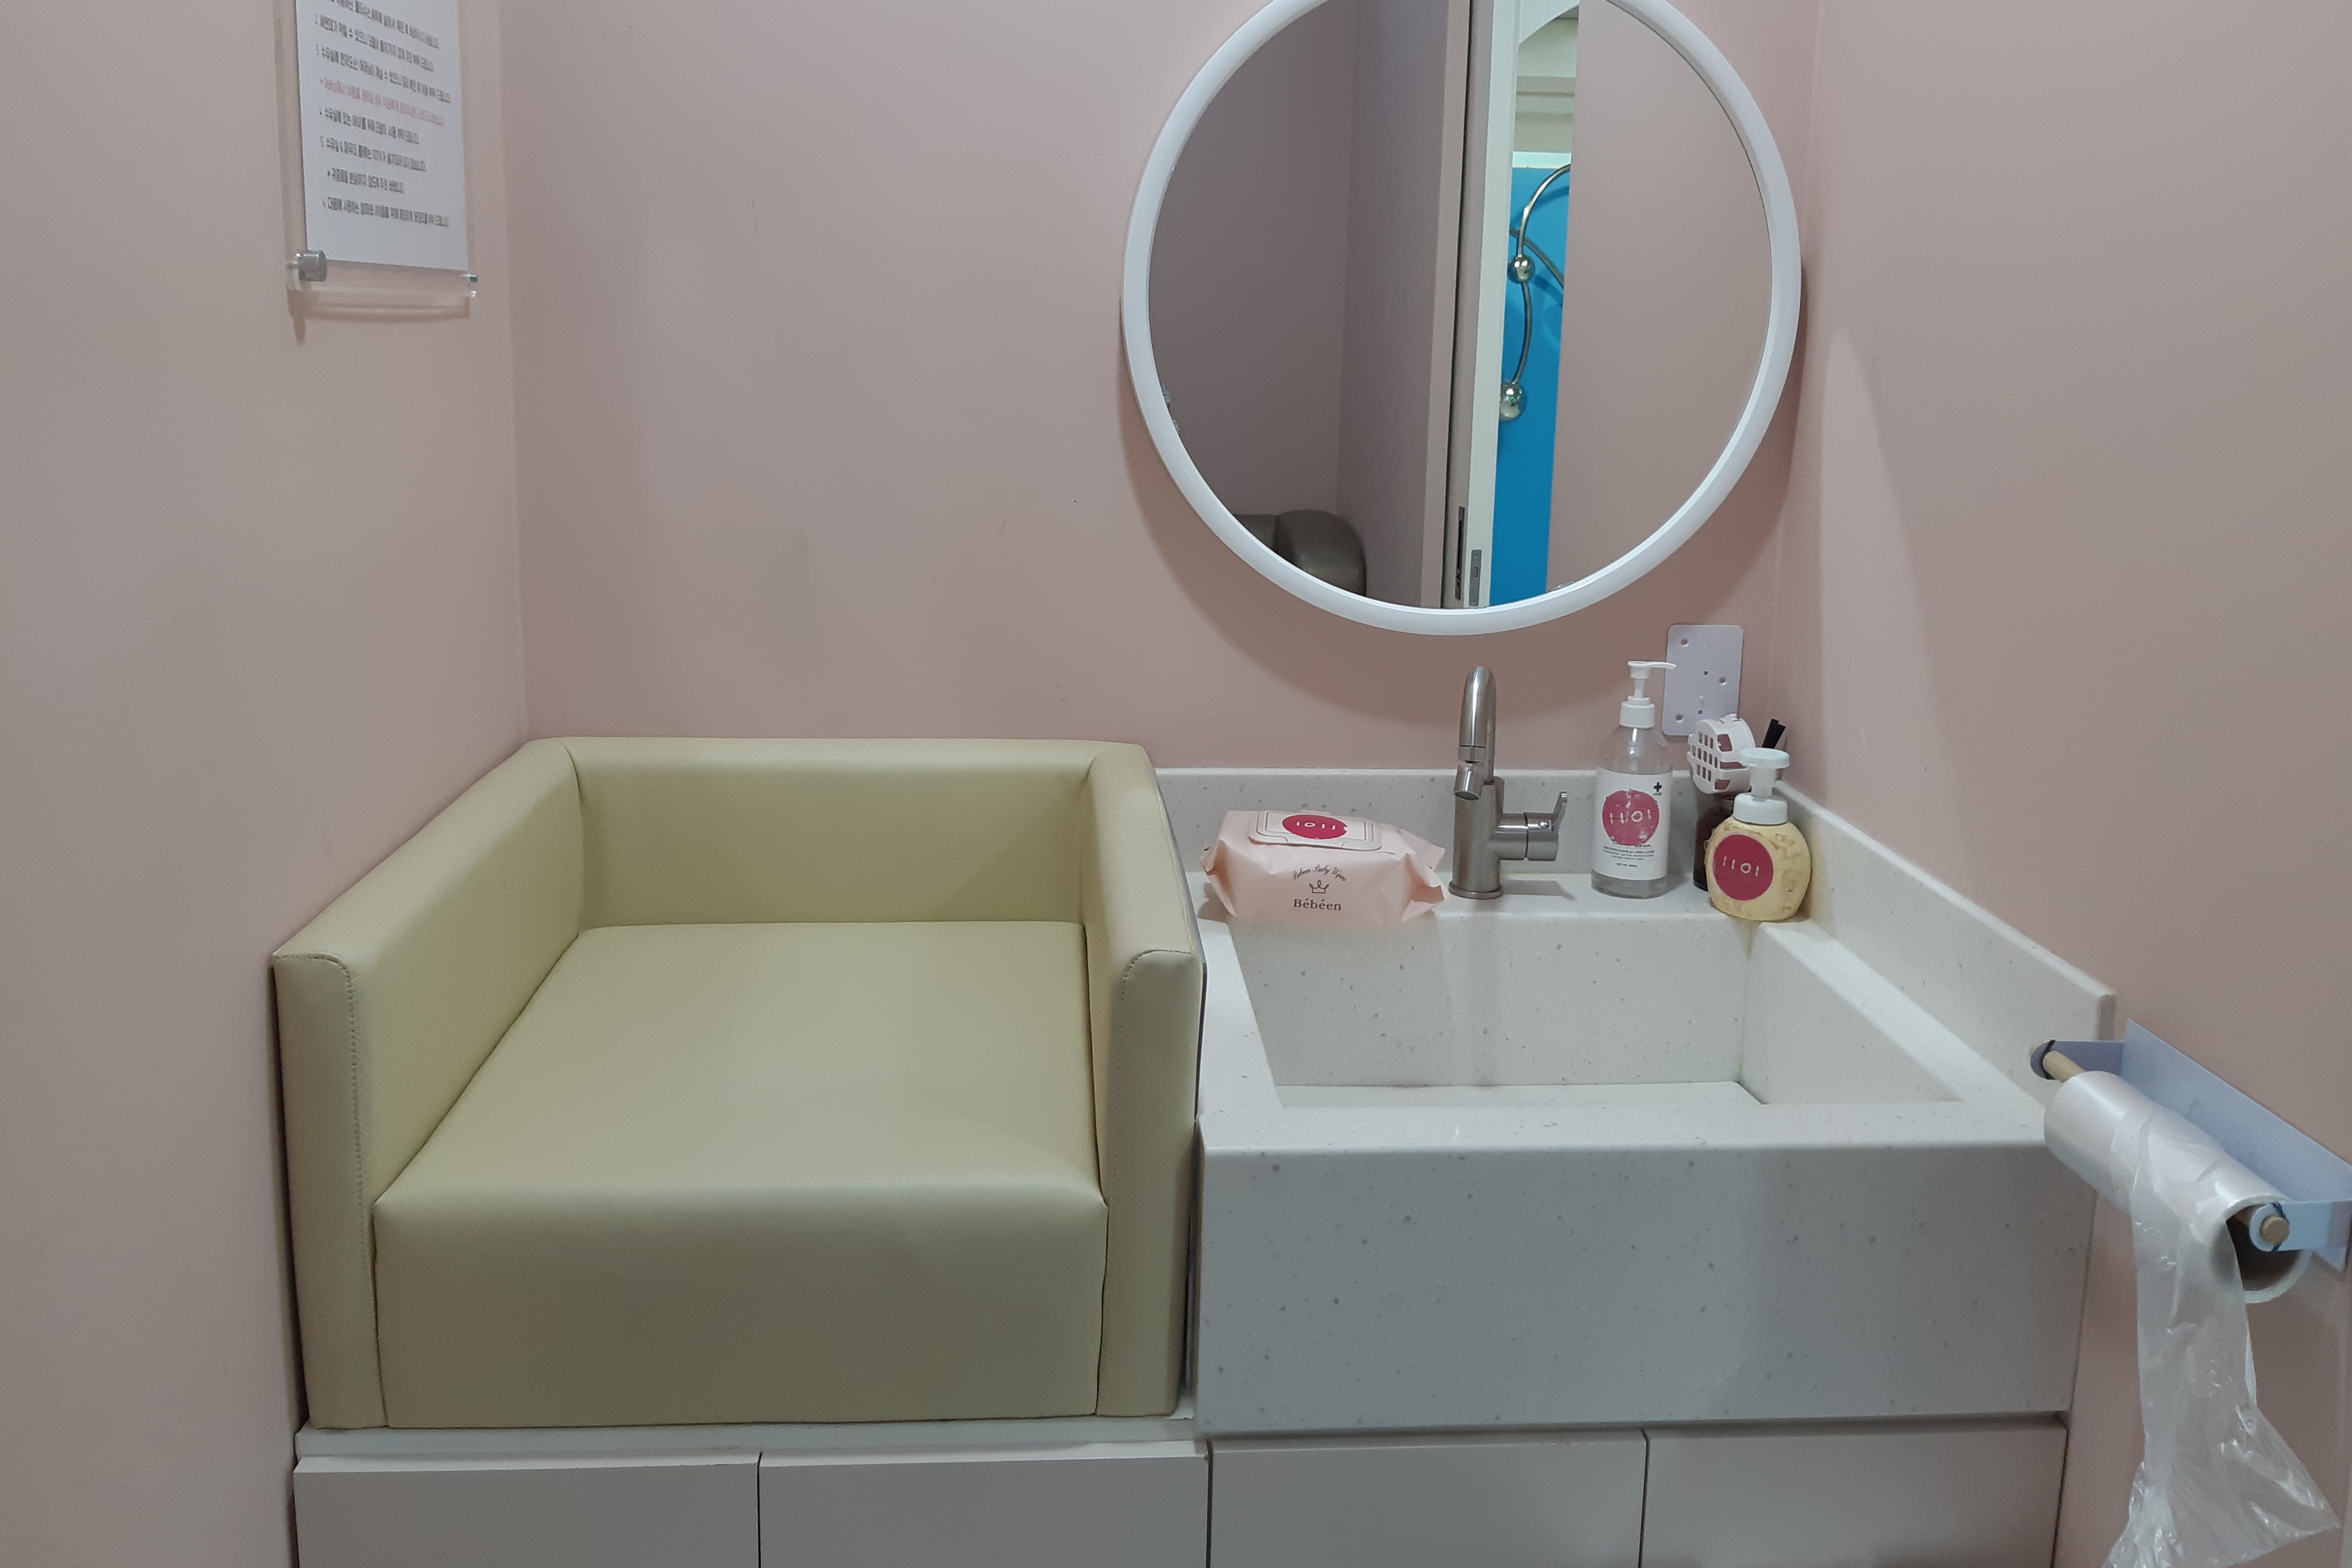 Nursing room near the Children resting area0 : Interior view of the nursing room with diaper changing station, basin, mirror, wet tissues and  hand sanitizer